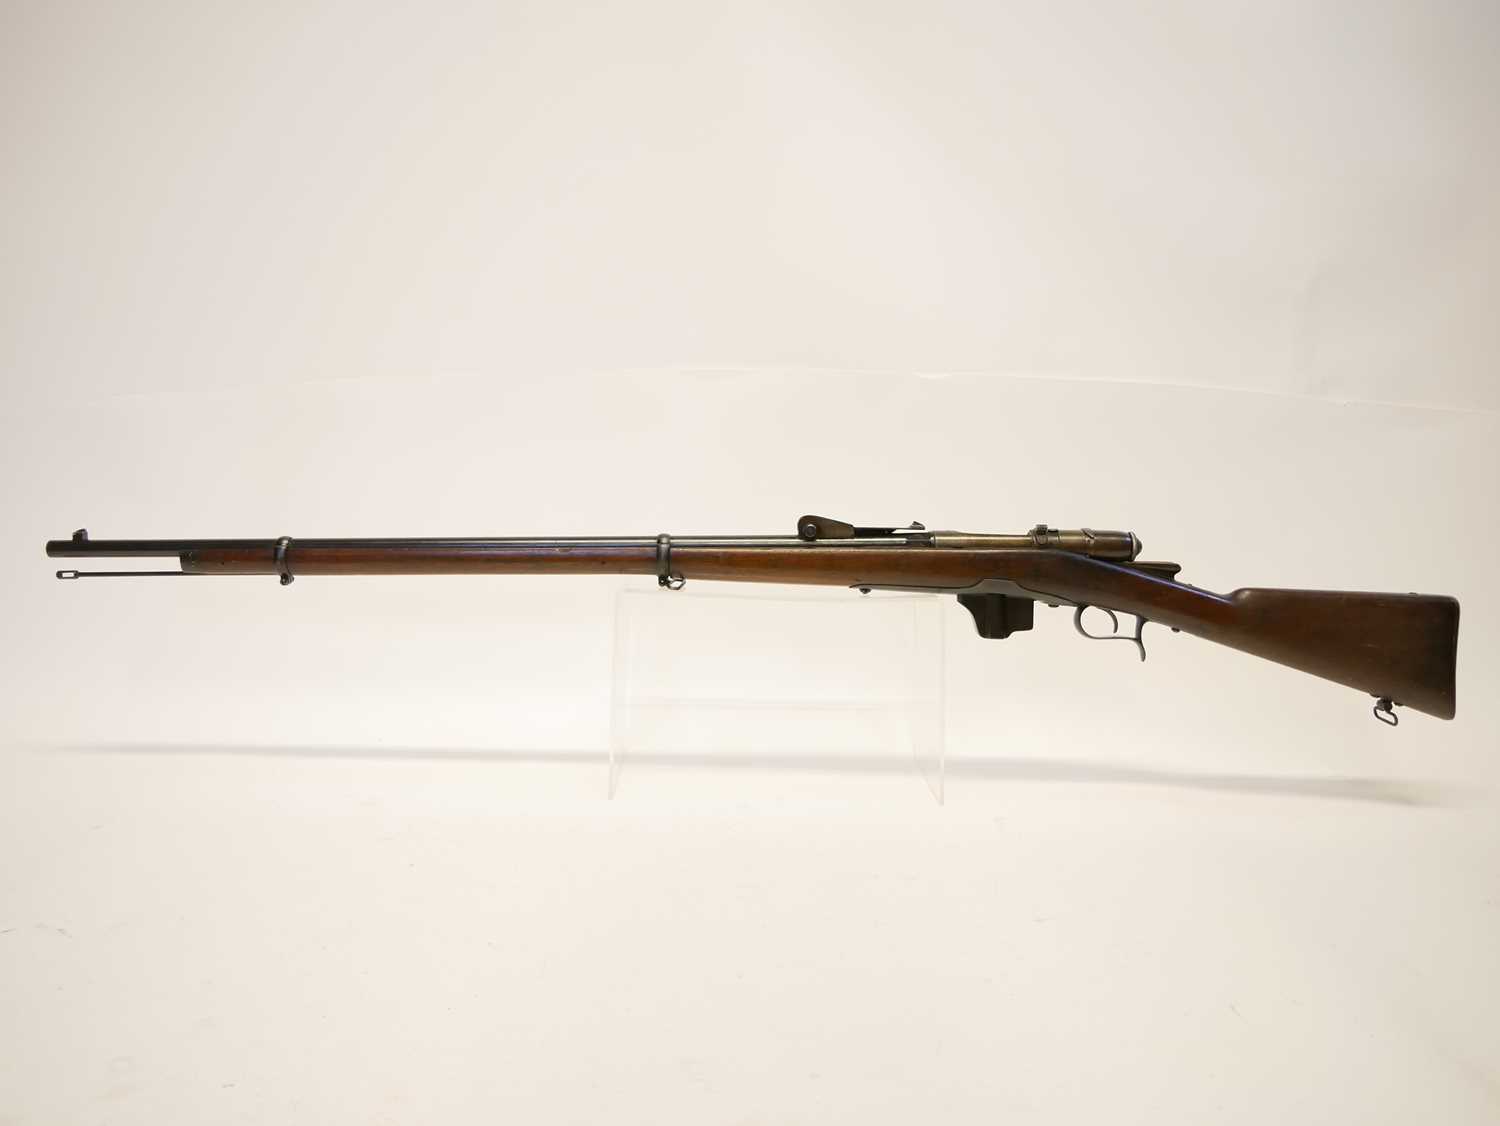 Italian Vetterli M.1870/87 10.35x47R bolt action rifle, serial number 5778, 33.5inch barrel fitted - Image 16 of 17